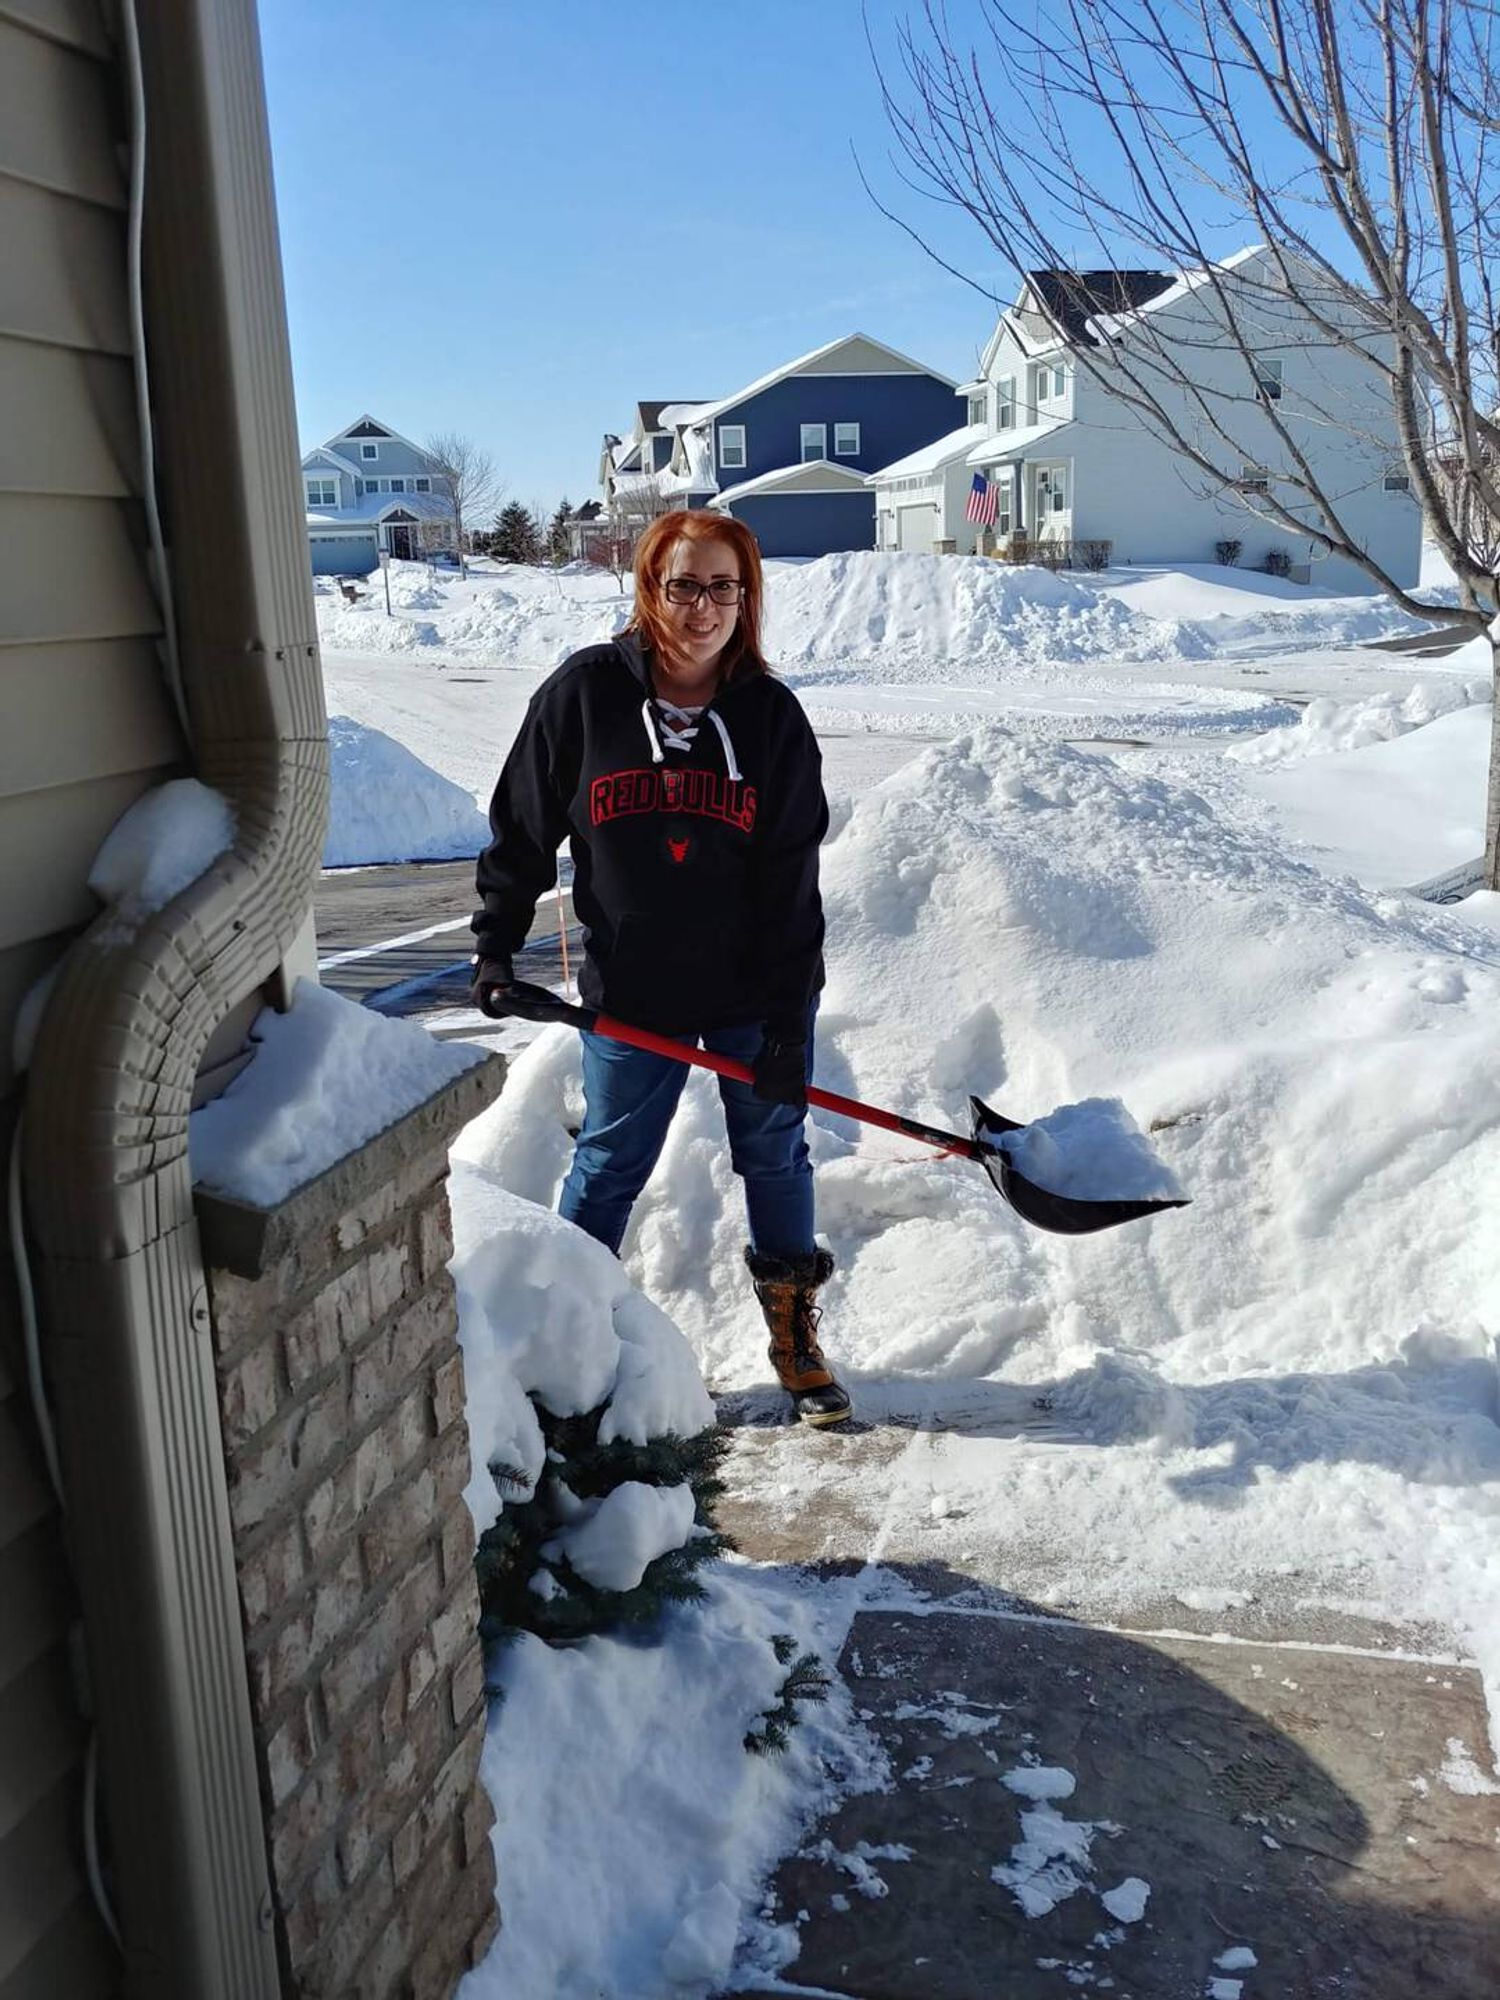 Amy shovels snow during an especially rough winter in Minnesota. Photo courtesy of the author.